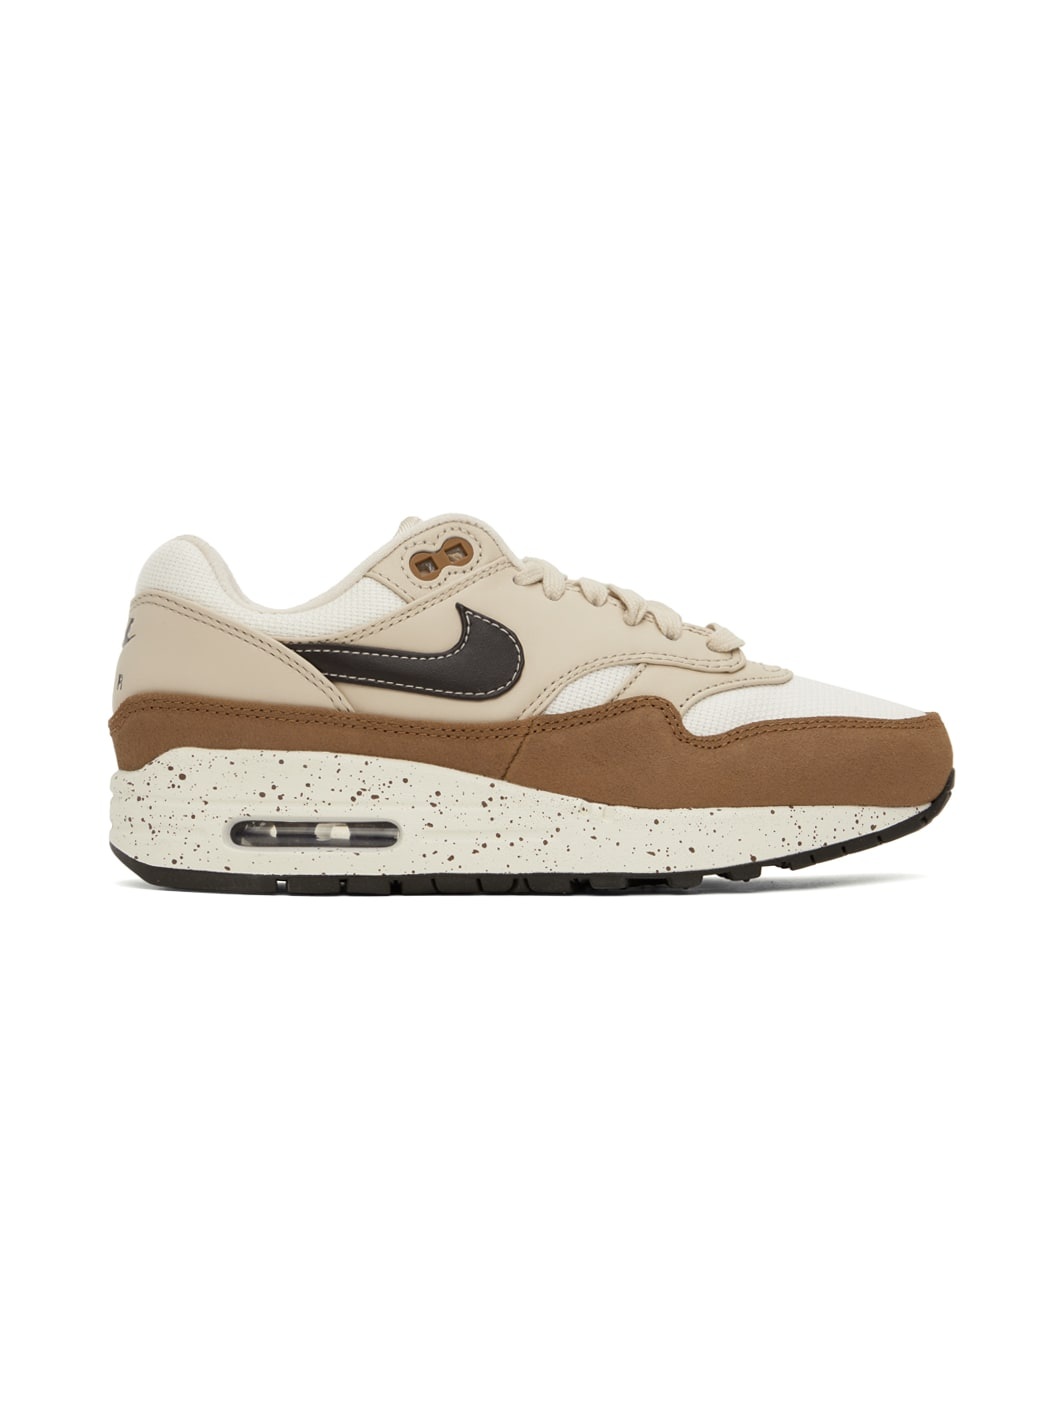 White & Brown Air Max 1 '87 Sneakers - 1